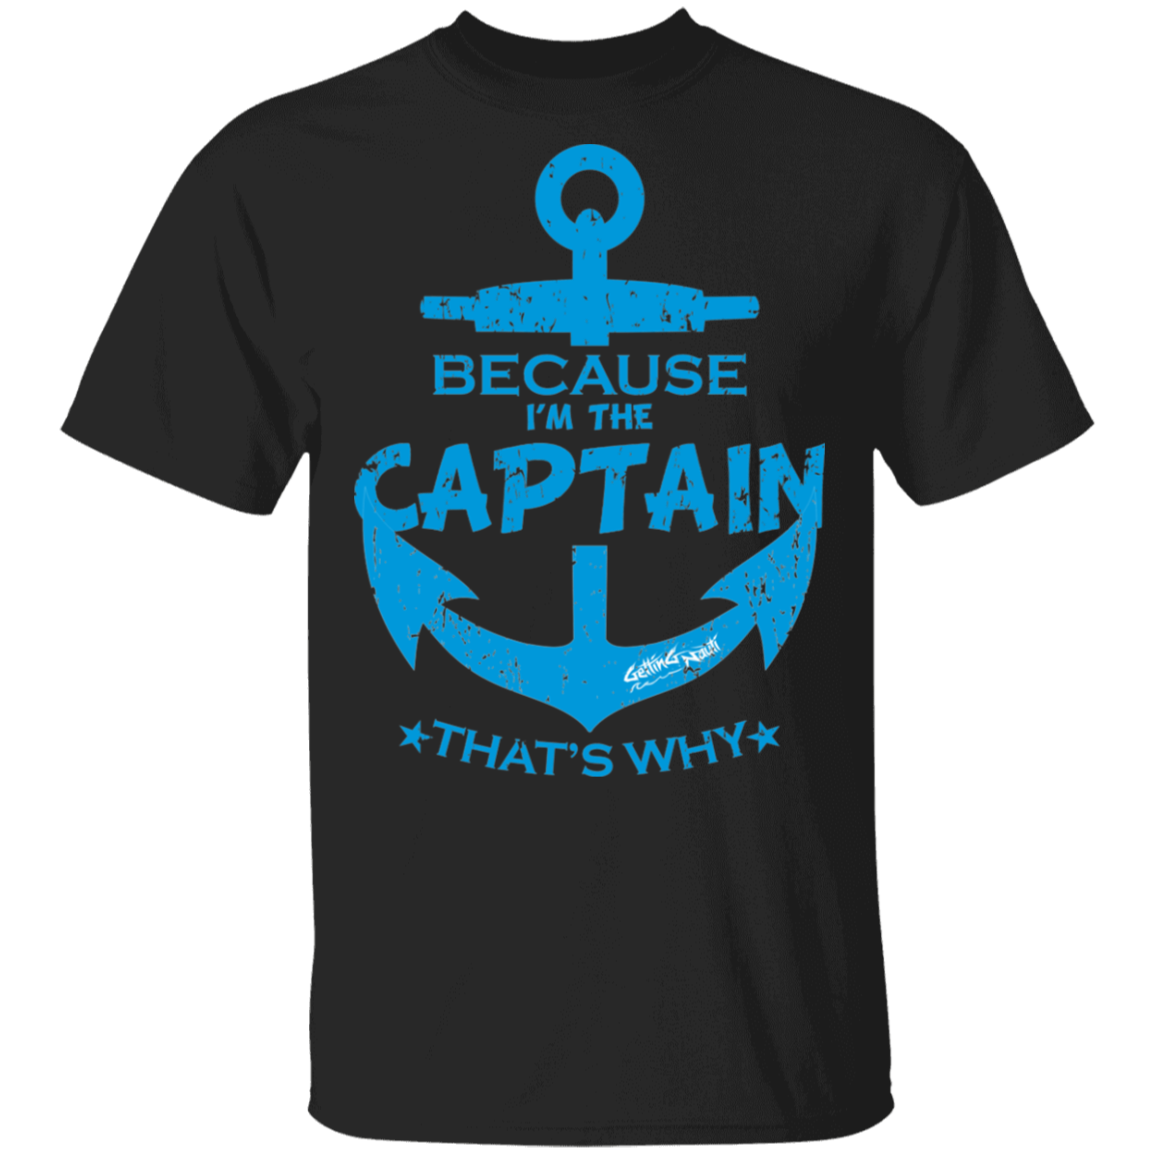 Because I'm The Captain - Cotton T-Shirt